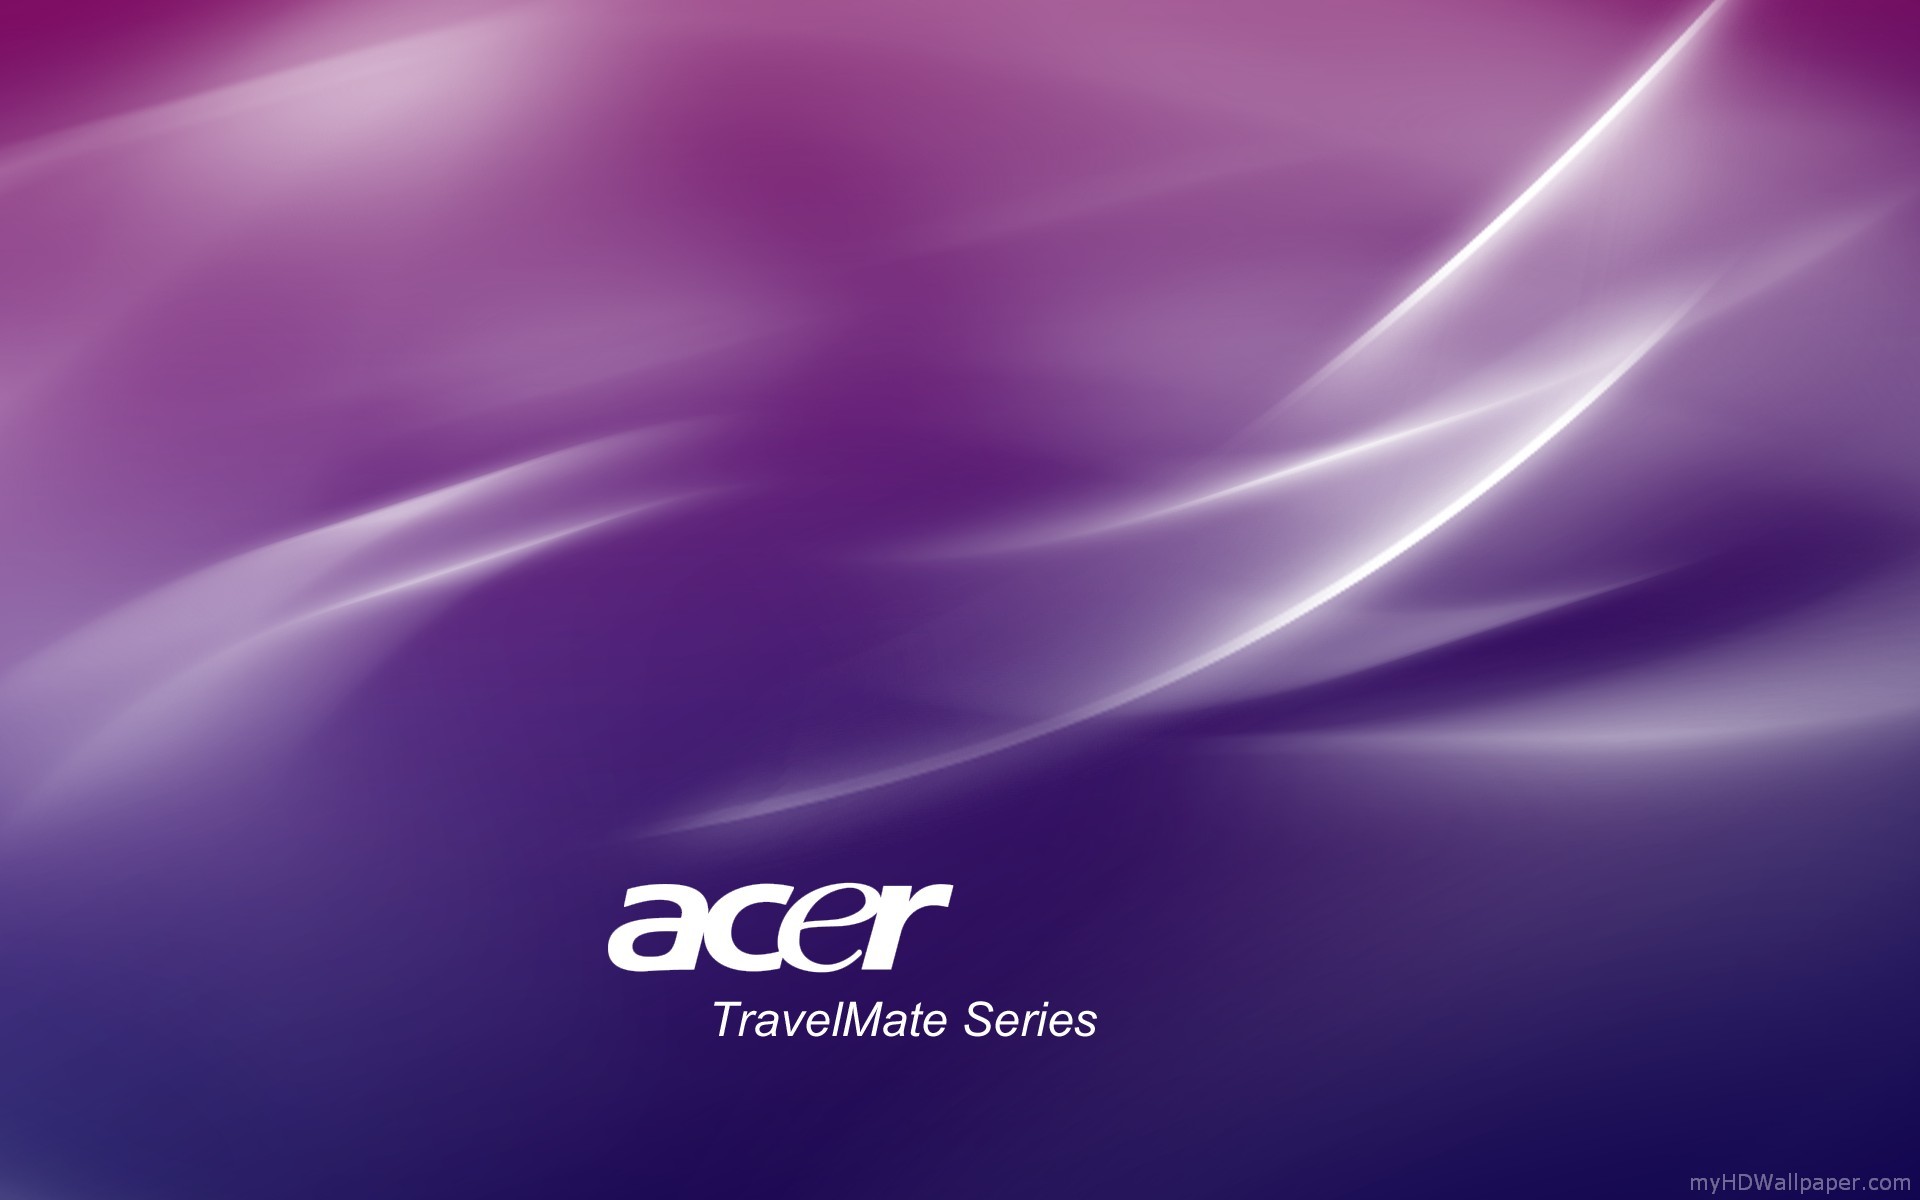 3D Acer Wallpaper For PC 53 Images